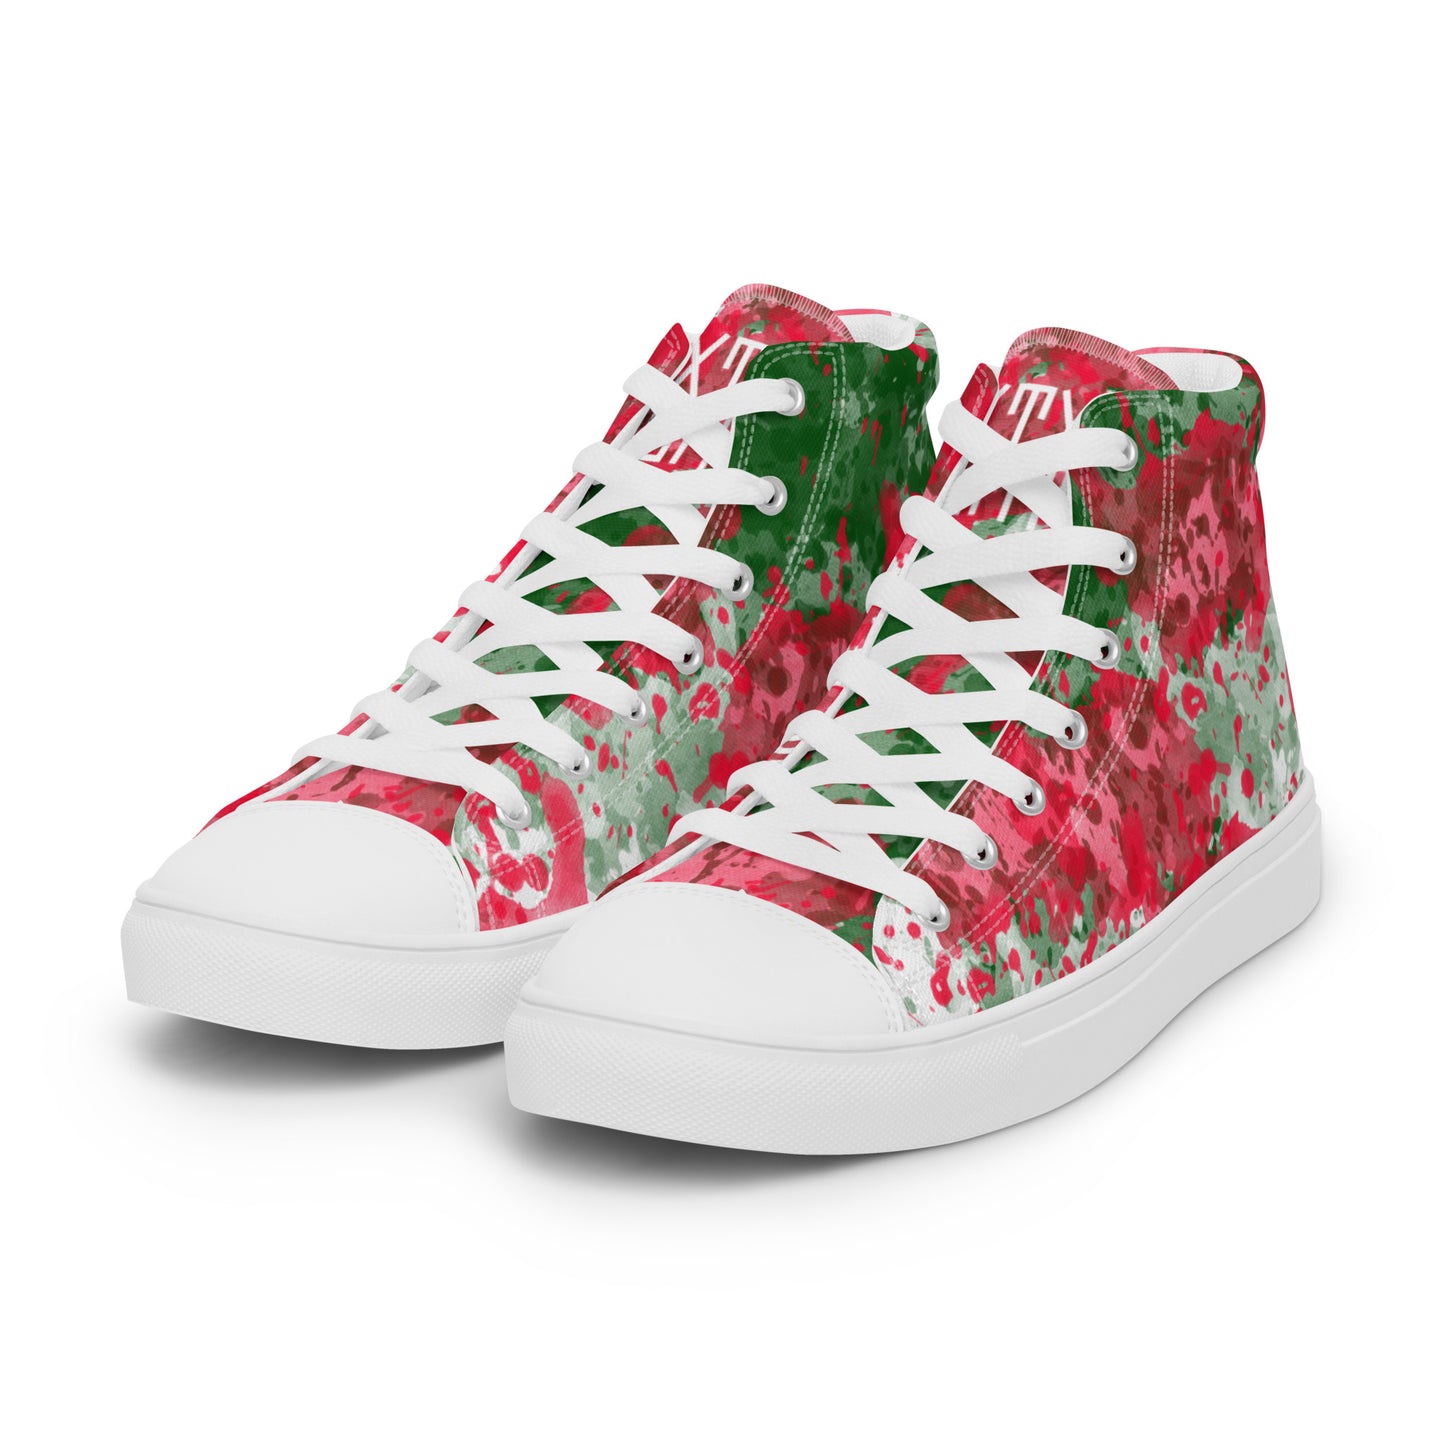 Sixty Eight 93 Logo White Crème Rose Green Men's High Top Shoes